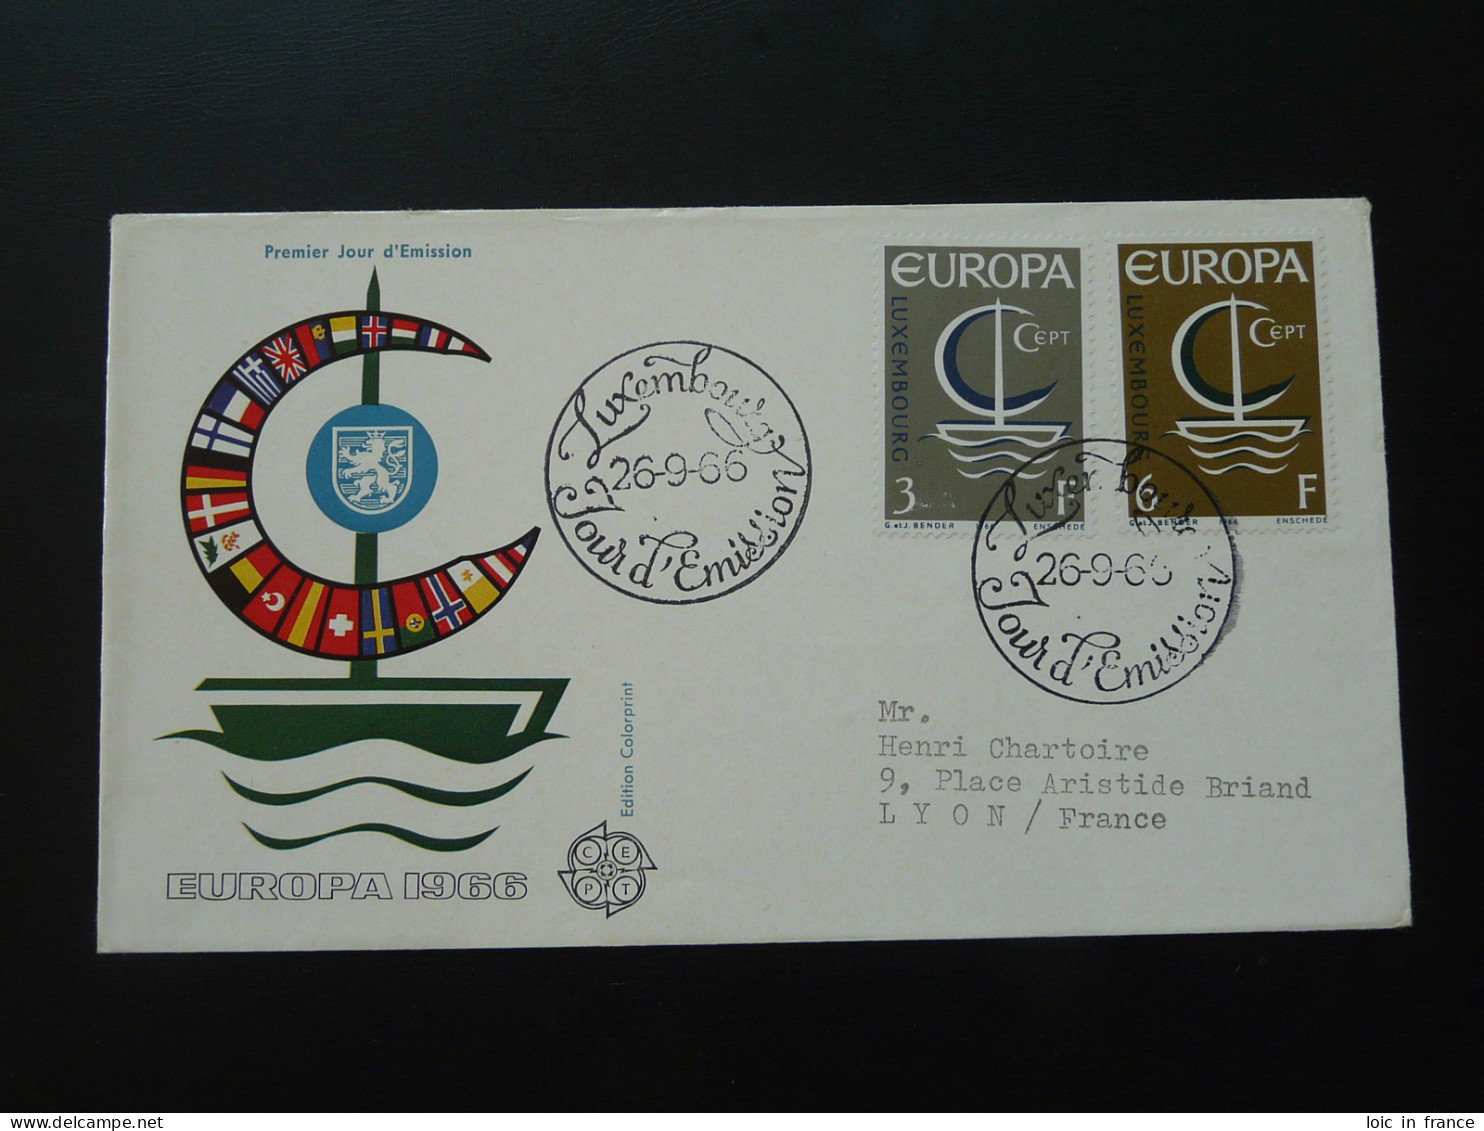 FDC Europa Cept Luxembourg 1966 (ex 2) - 1966